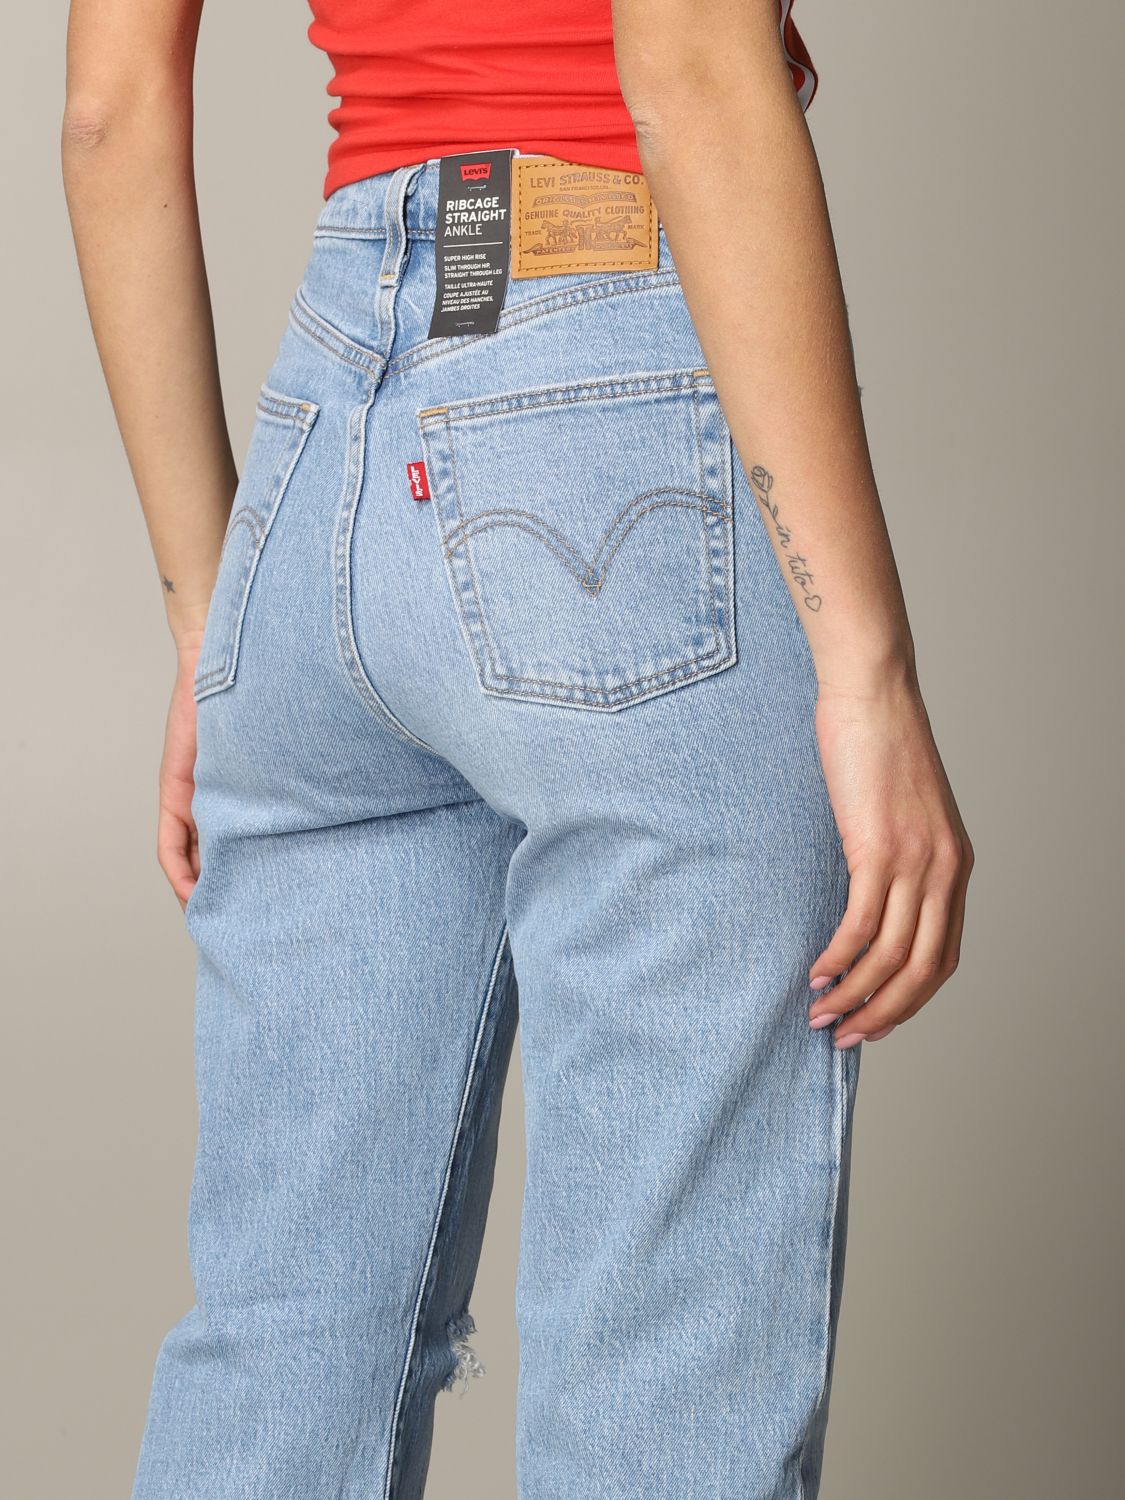 high wasted levis